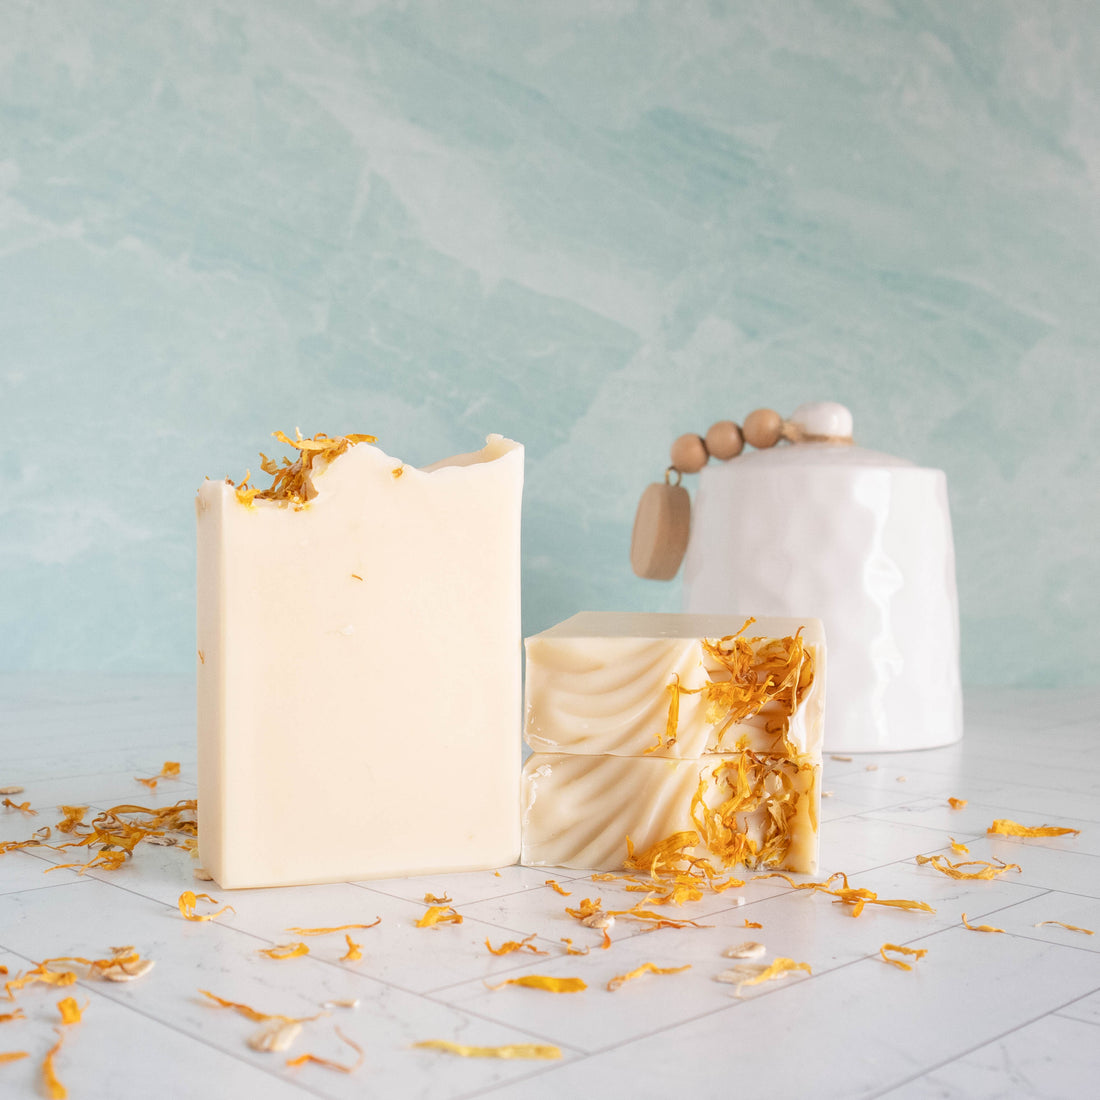 a bar of our soothing calendula soap is standing showing the creamy white soap. No swirls with this one, just creamy goodness. there are two other bars laying flat showing the tops that have some texture and then some calendula petals to give interest. there is a white crock in the background, a green wall in the background and on the surface are scattered calendula petals.